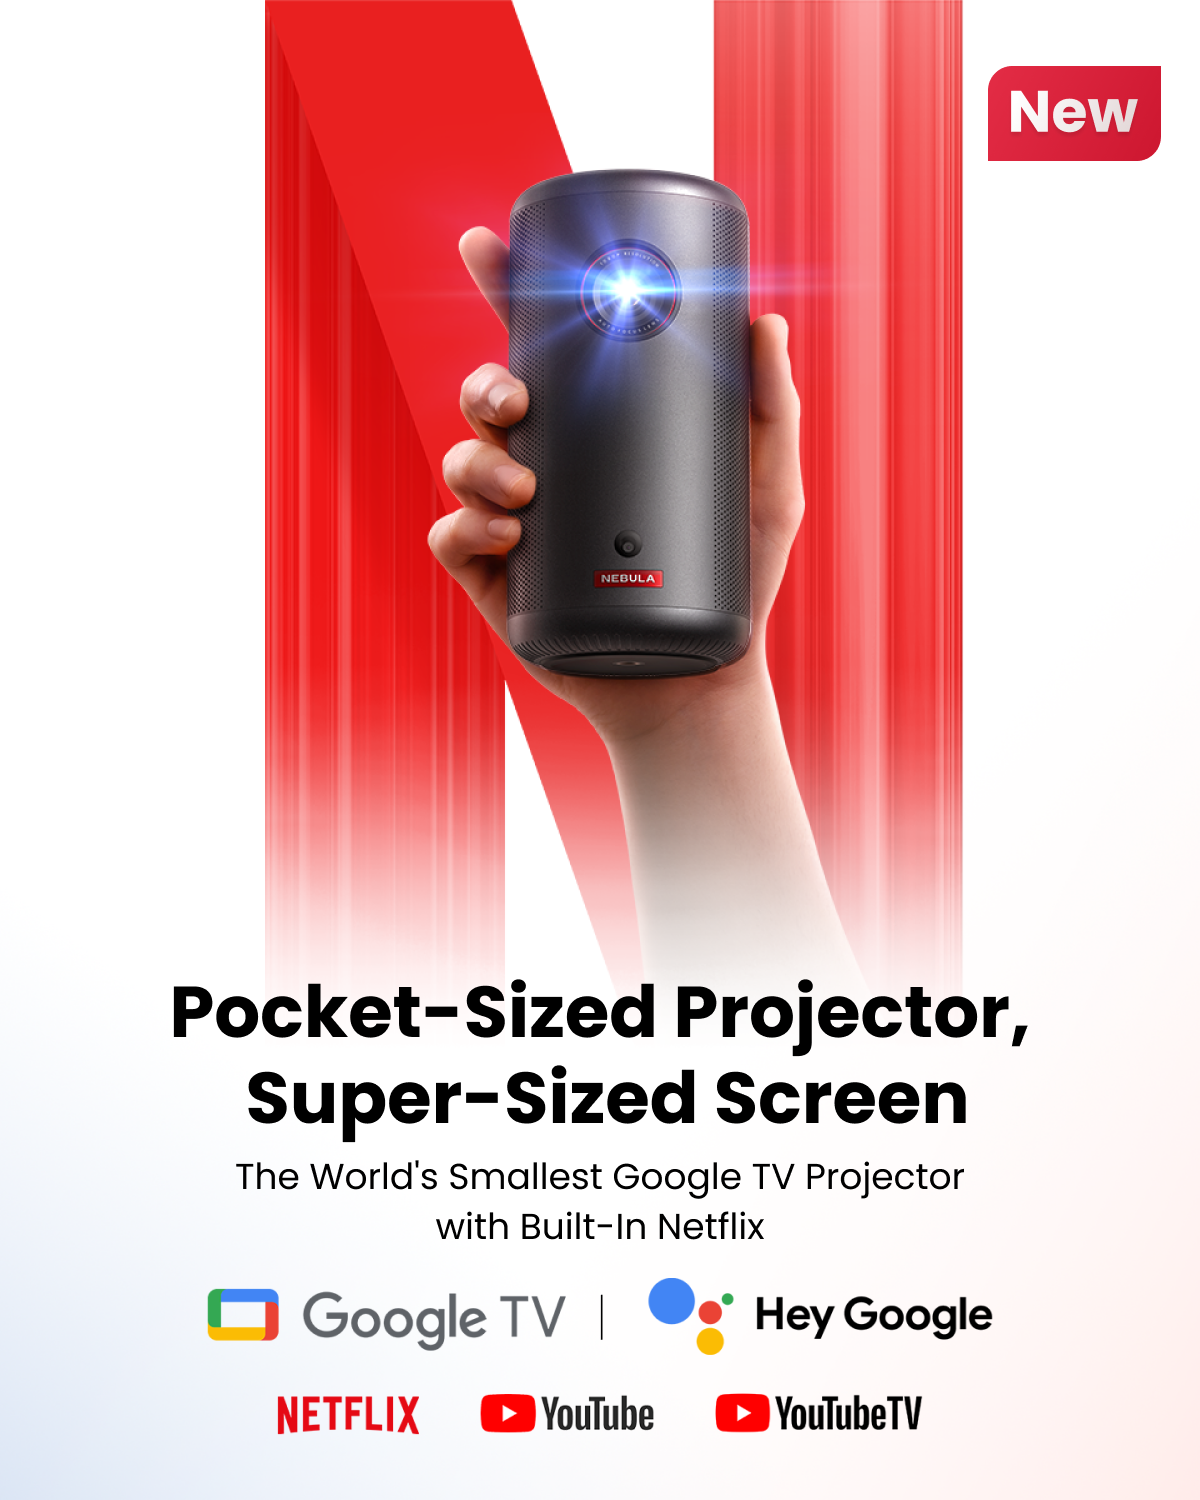 How Can I Stream and Control Netflix from My Phone on a Projector?